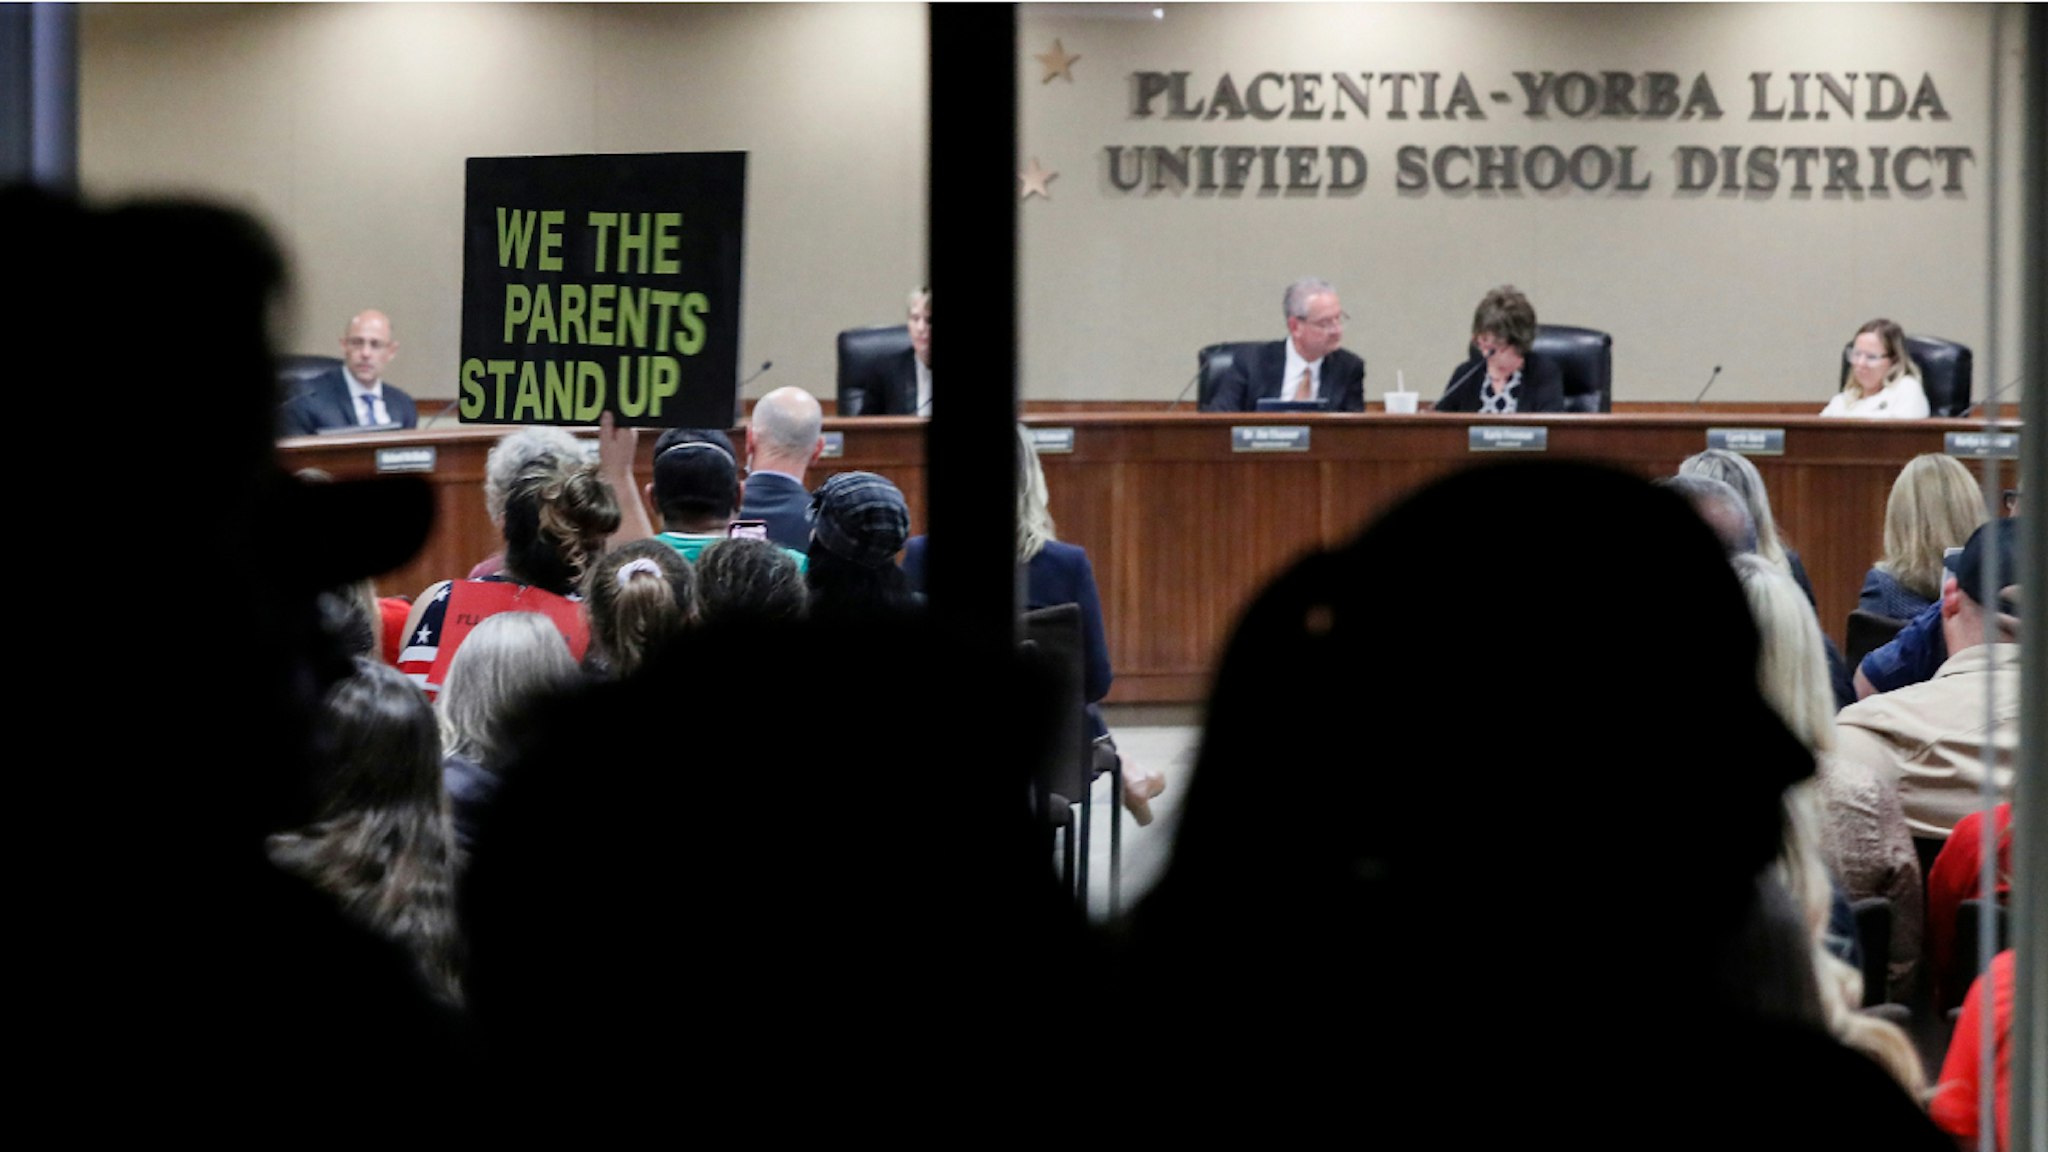 Yorba Linda, CA, Tuesday, November 16, 2021 - Spectators left outside due to a room filled to capacity, watch through a window as the Placentia Yorba Linda School Board discusses a proposed resolution to ban critical race theory from being taught in schools.